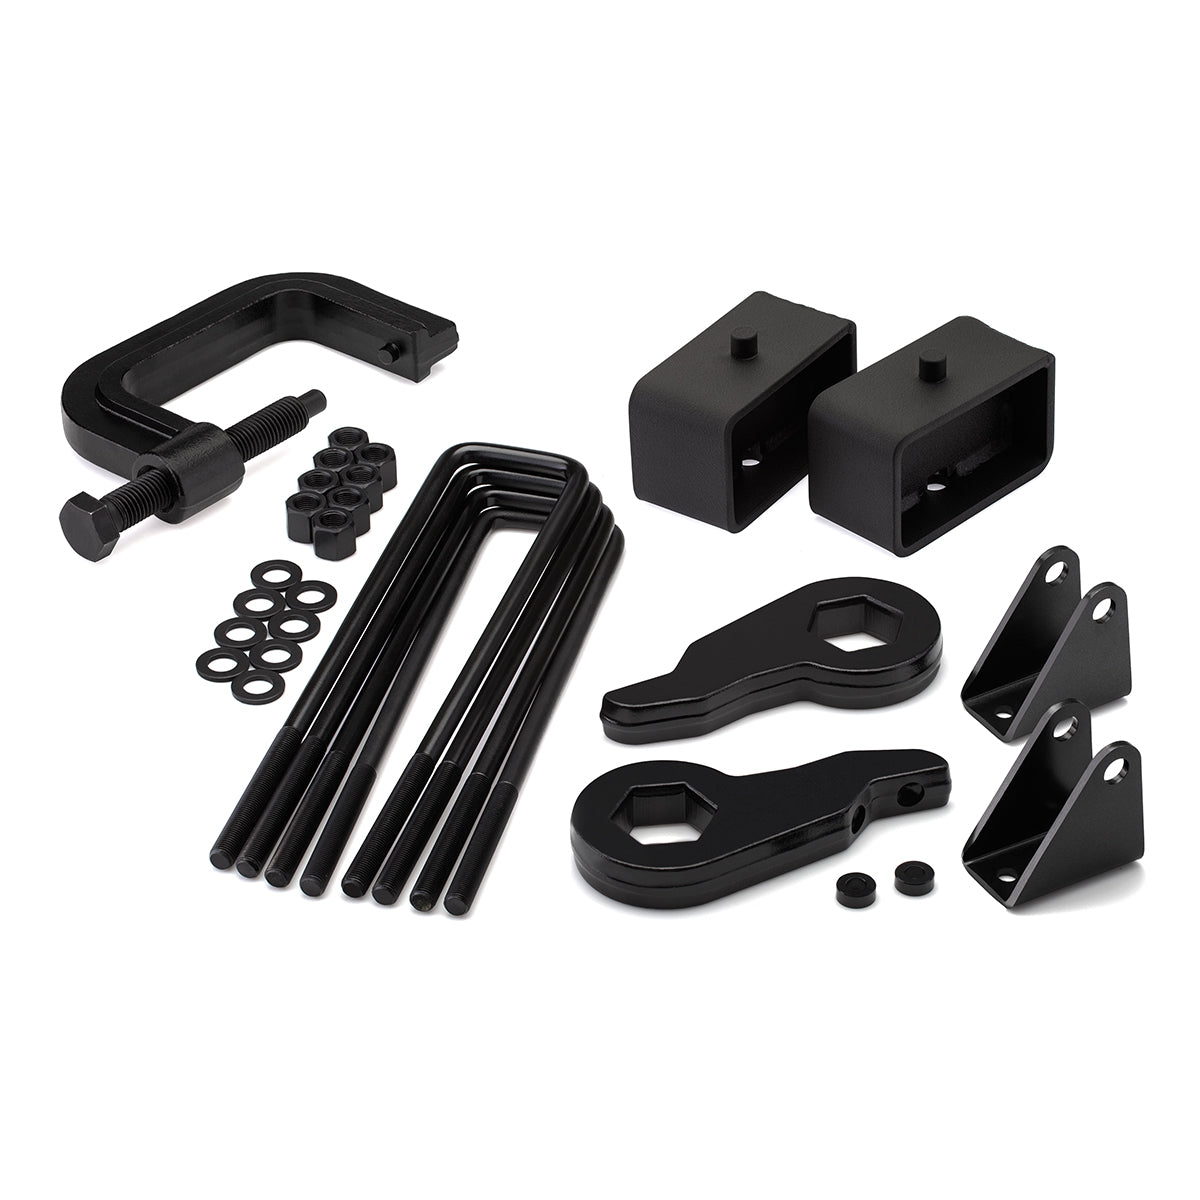 2000-2010 Chevy Silverado 3500HD Full Lift Kit with Shock Extender Brackets and Torsion Key Unloading/Removal Tool